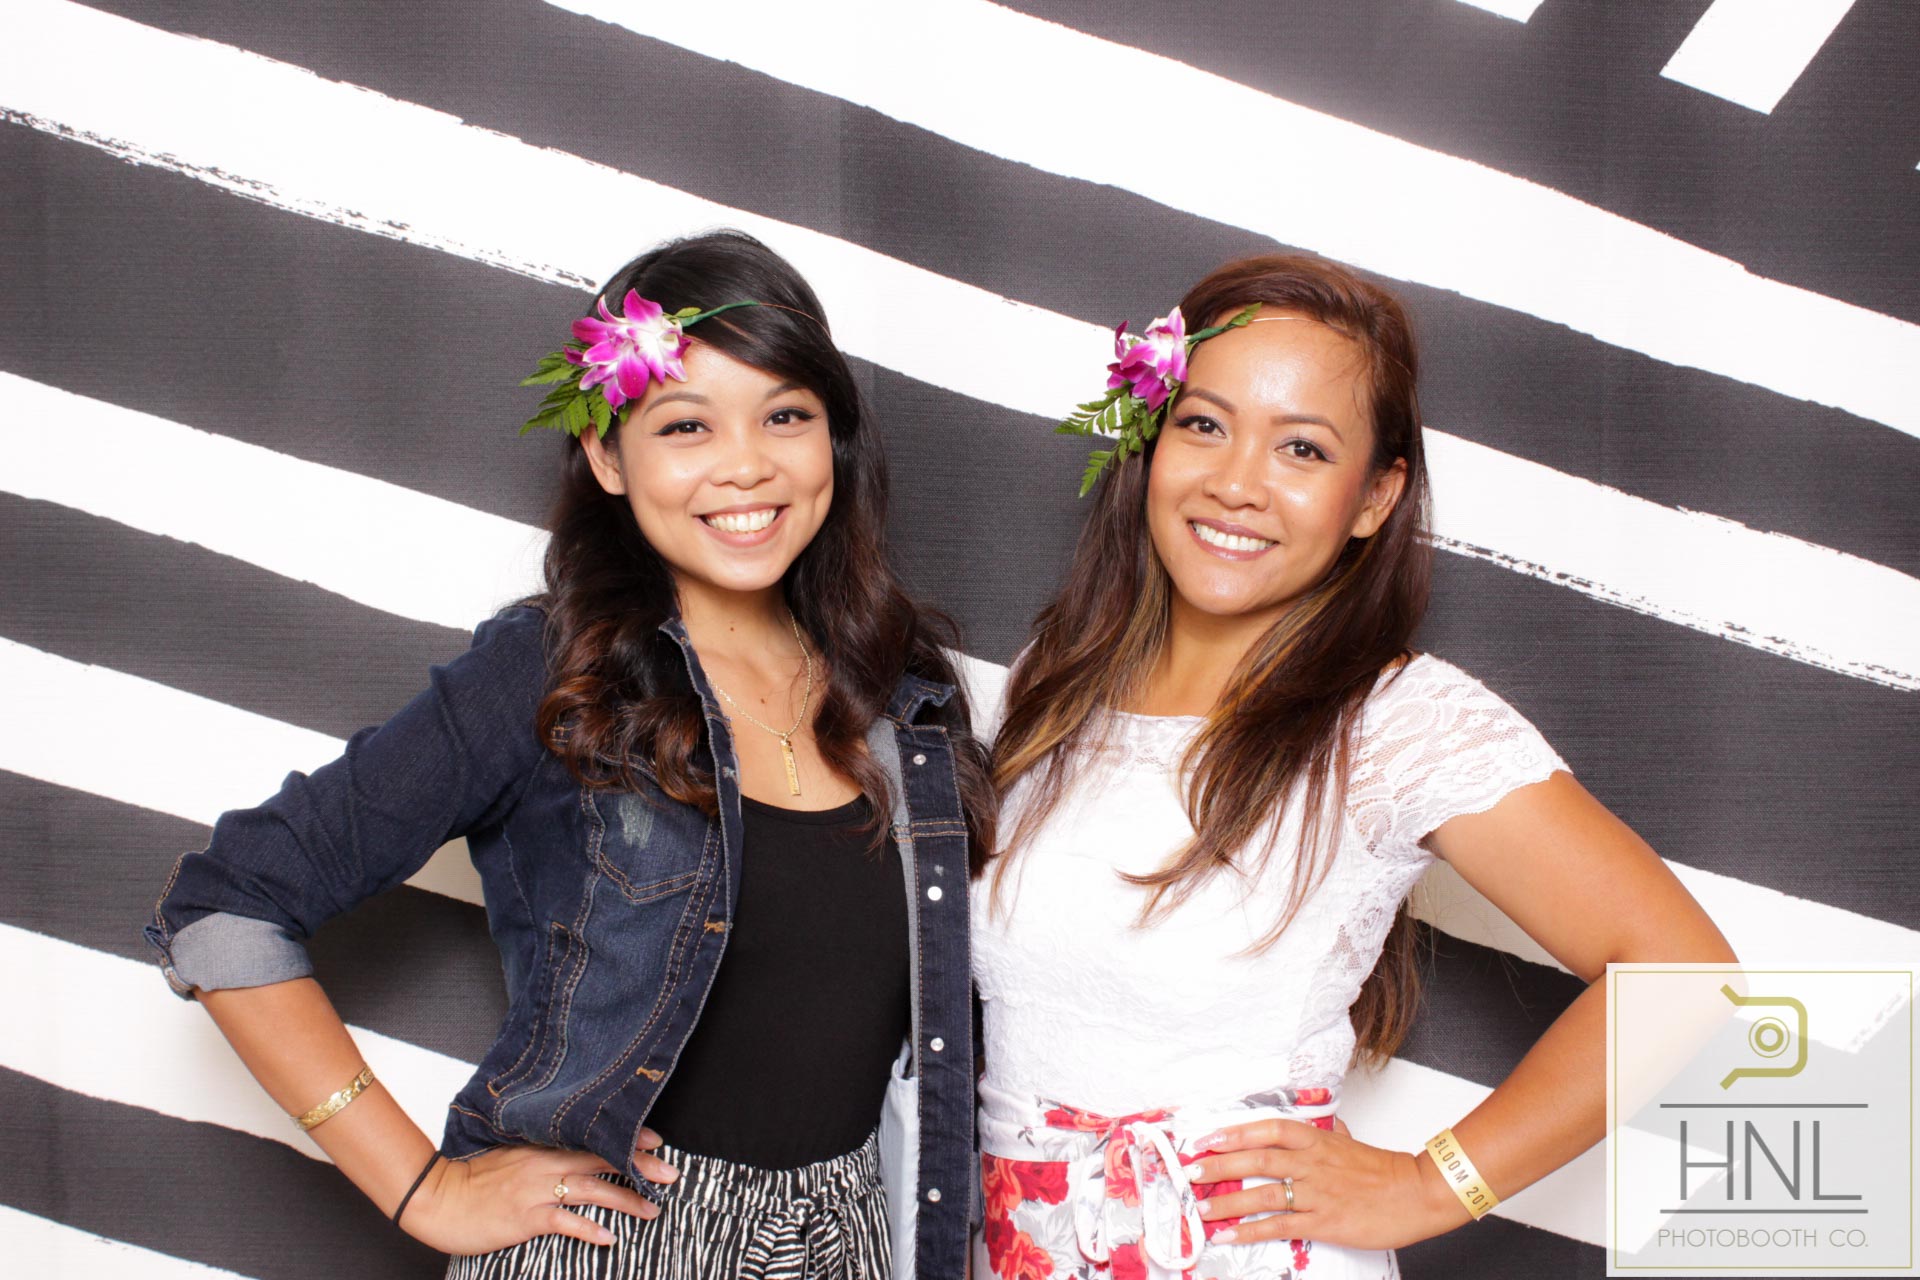 Bloom Conference Blaisdell Concert Hall Oahu Hawaii Photo Booth NEW-80.jpg